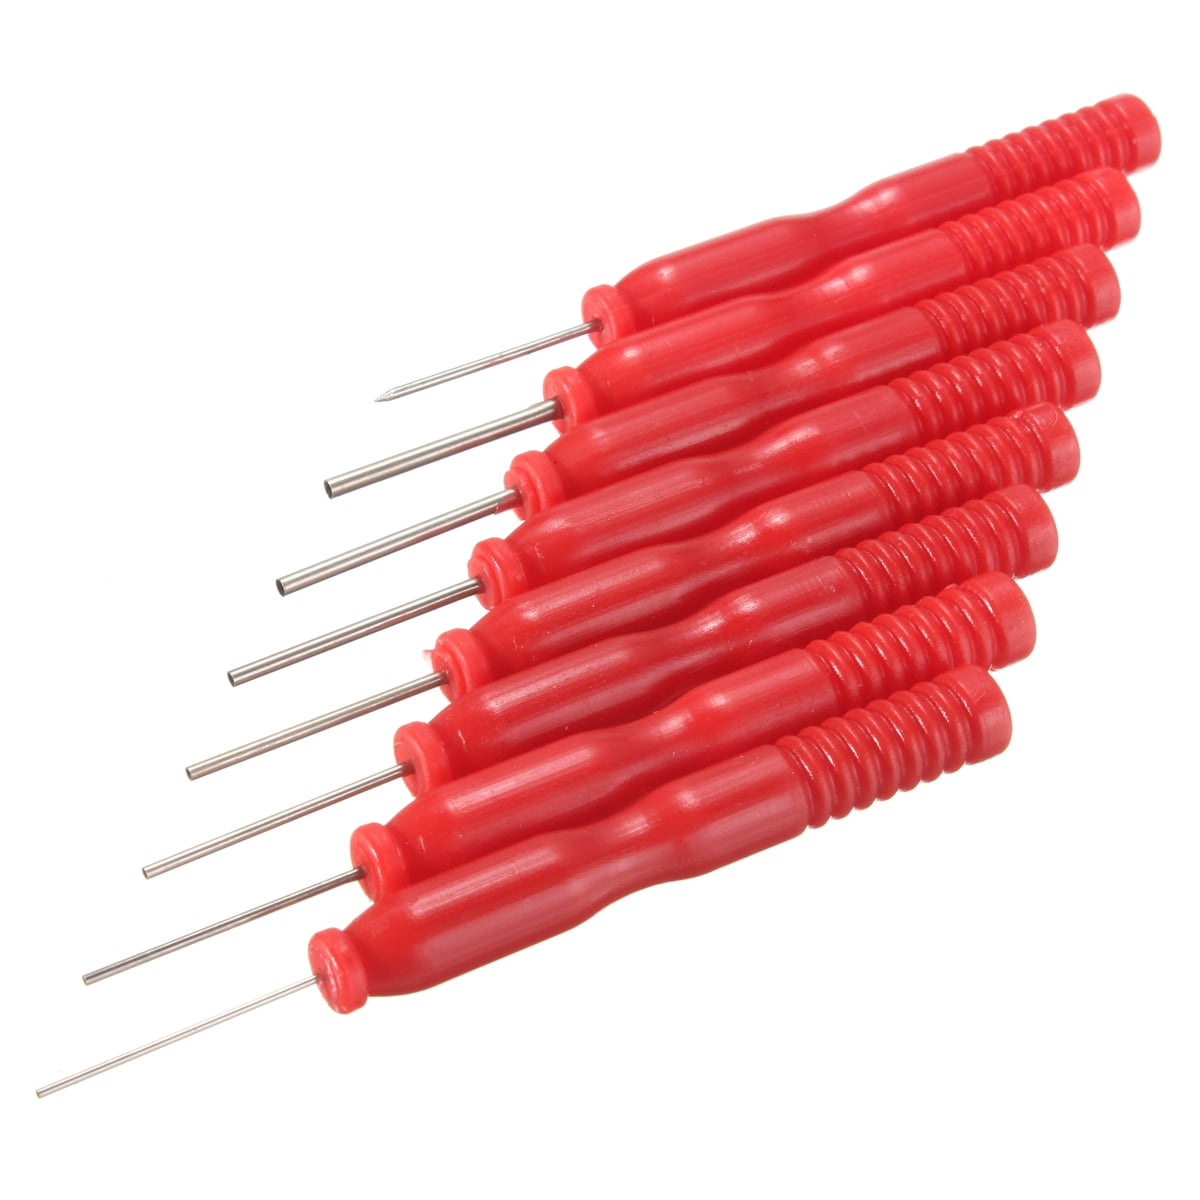 8PCS Hollow Needles Desoldering Tool Electronic Components Stainless Steel Red 